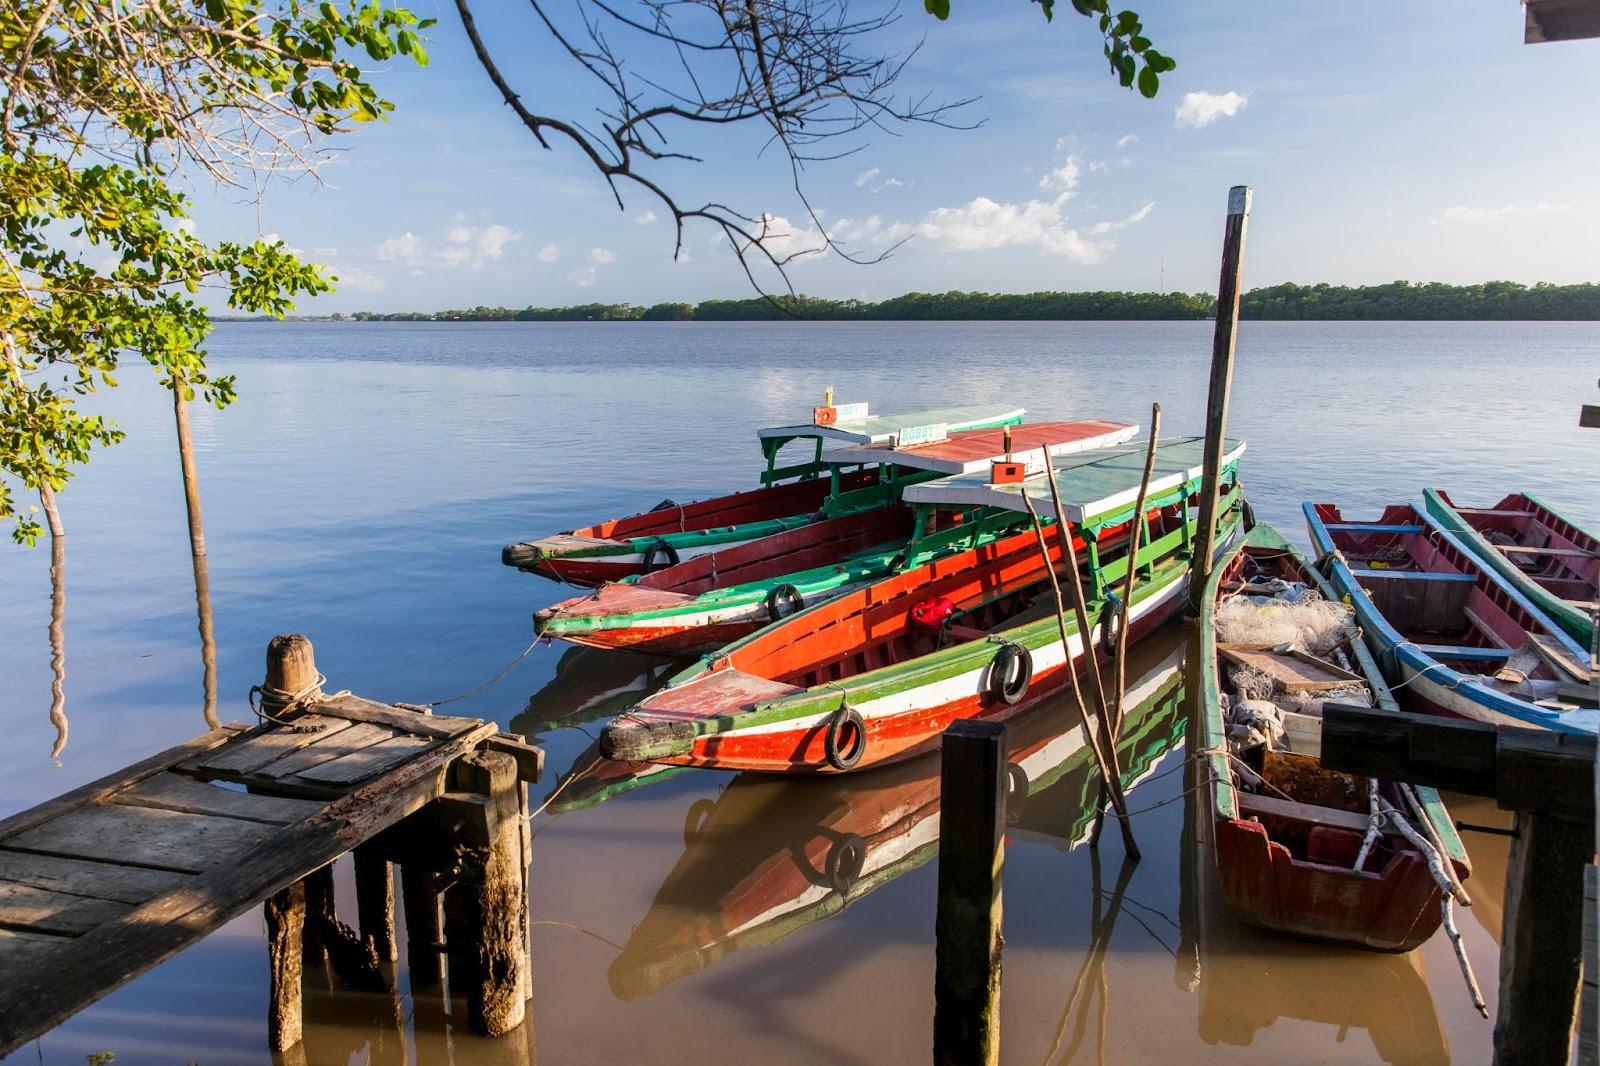 Colorful traditional boats on the Suriname river, Suriname